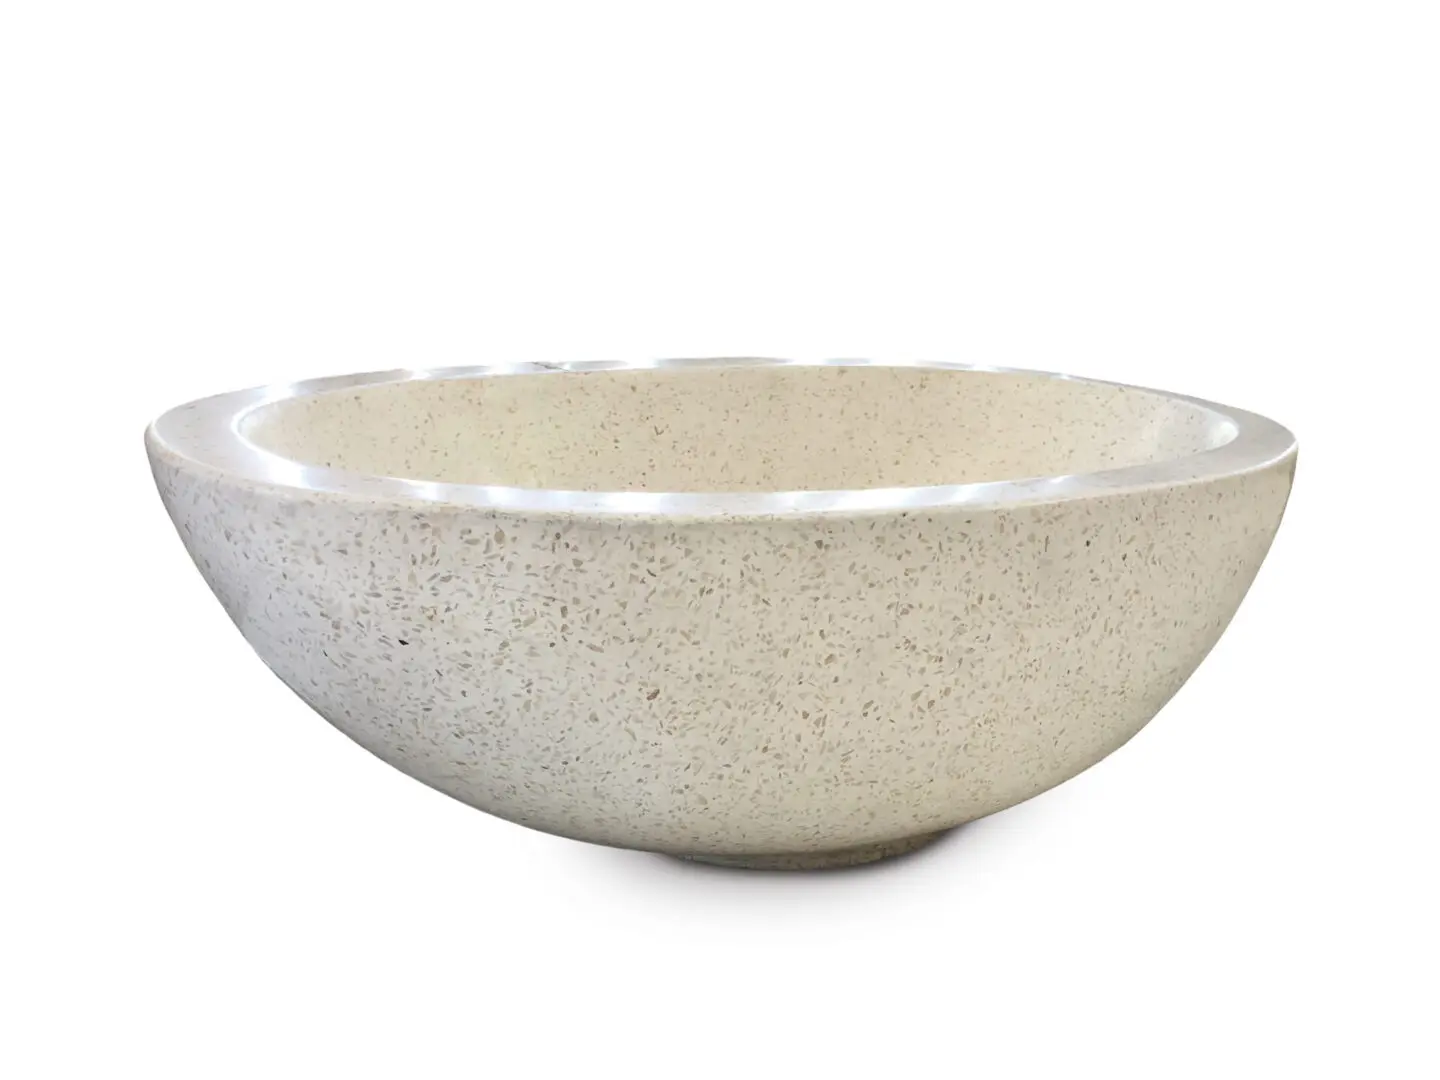 A white bowl with some type of design on it